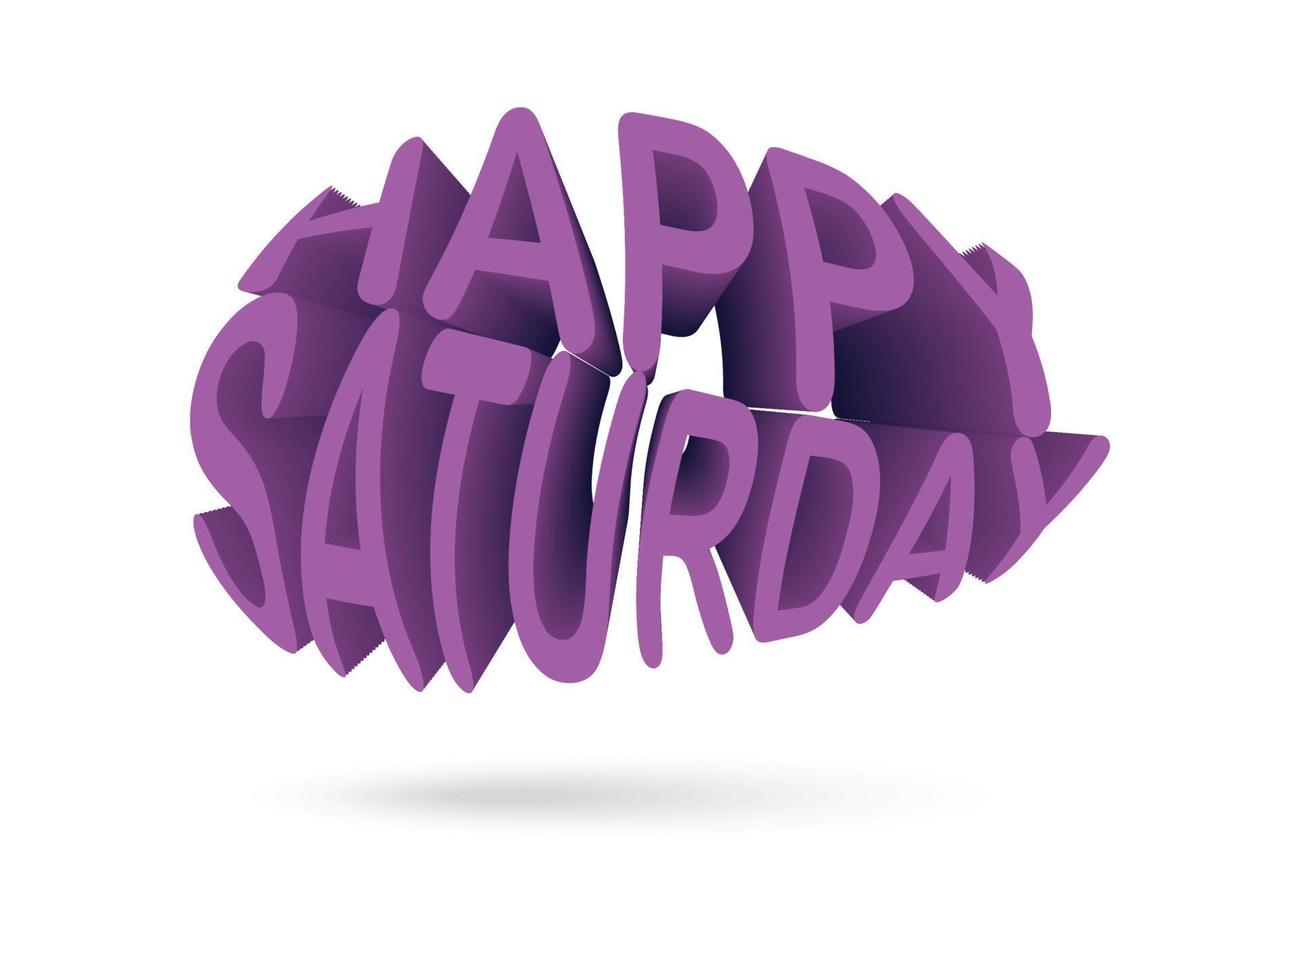 Happy Saturday  colorful typography  Greeting text of Happy  card poster banner vector